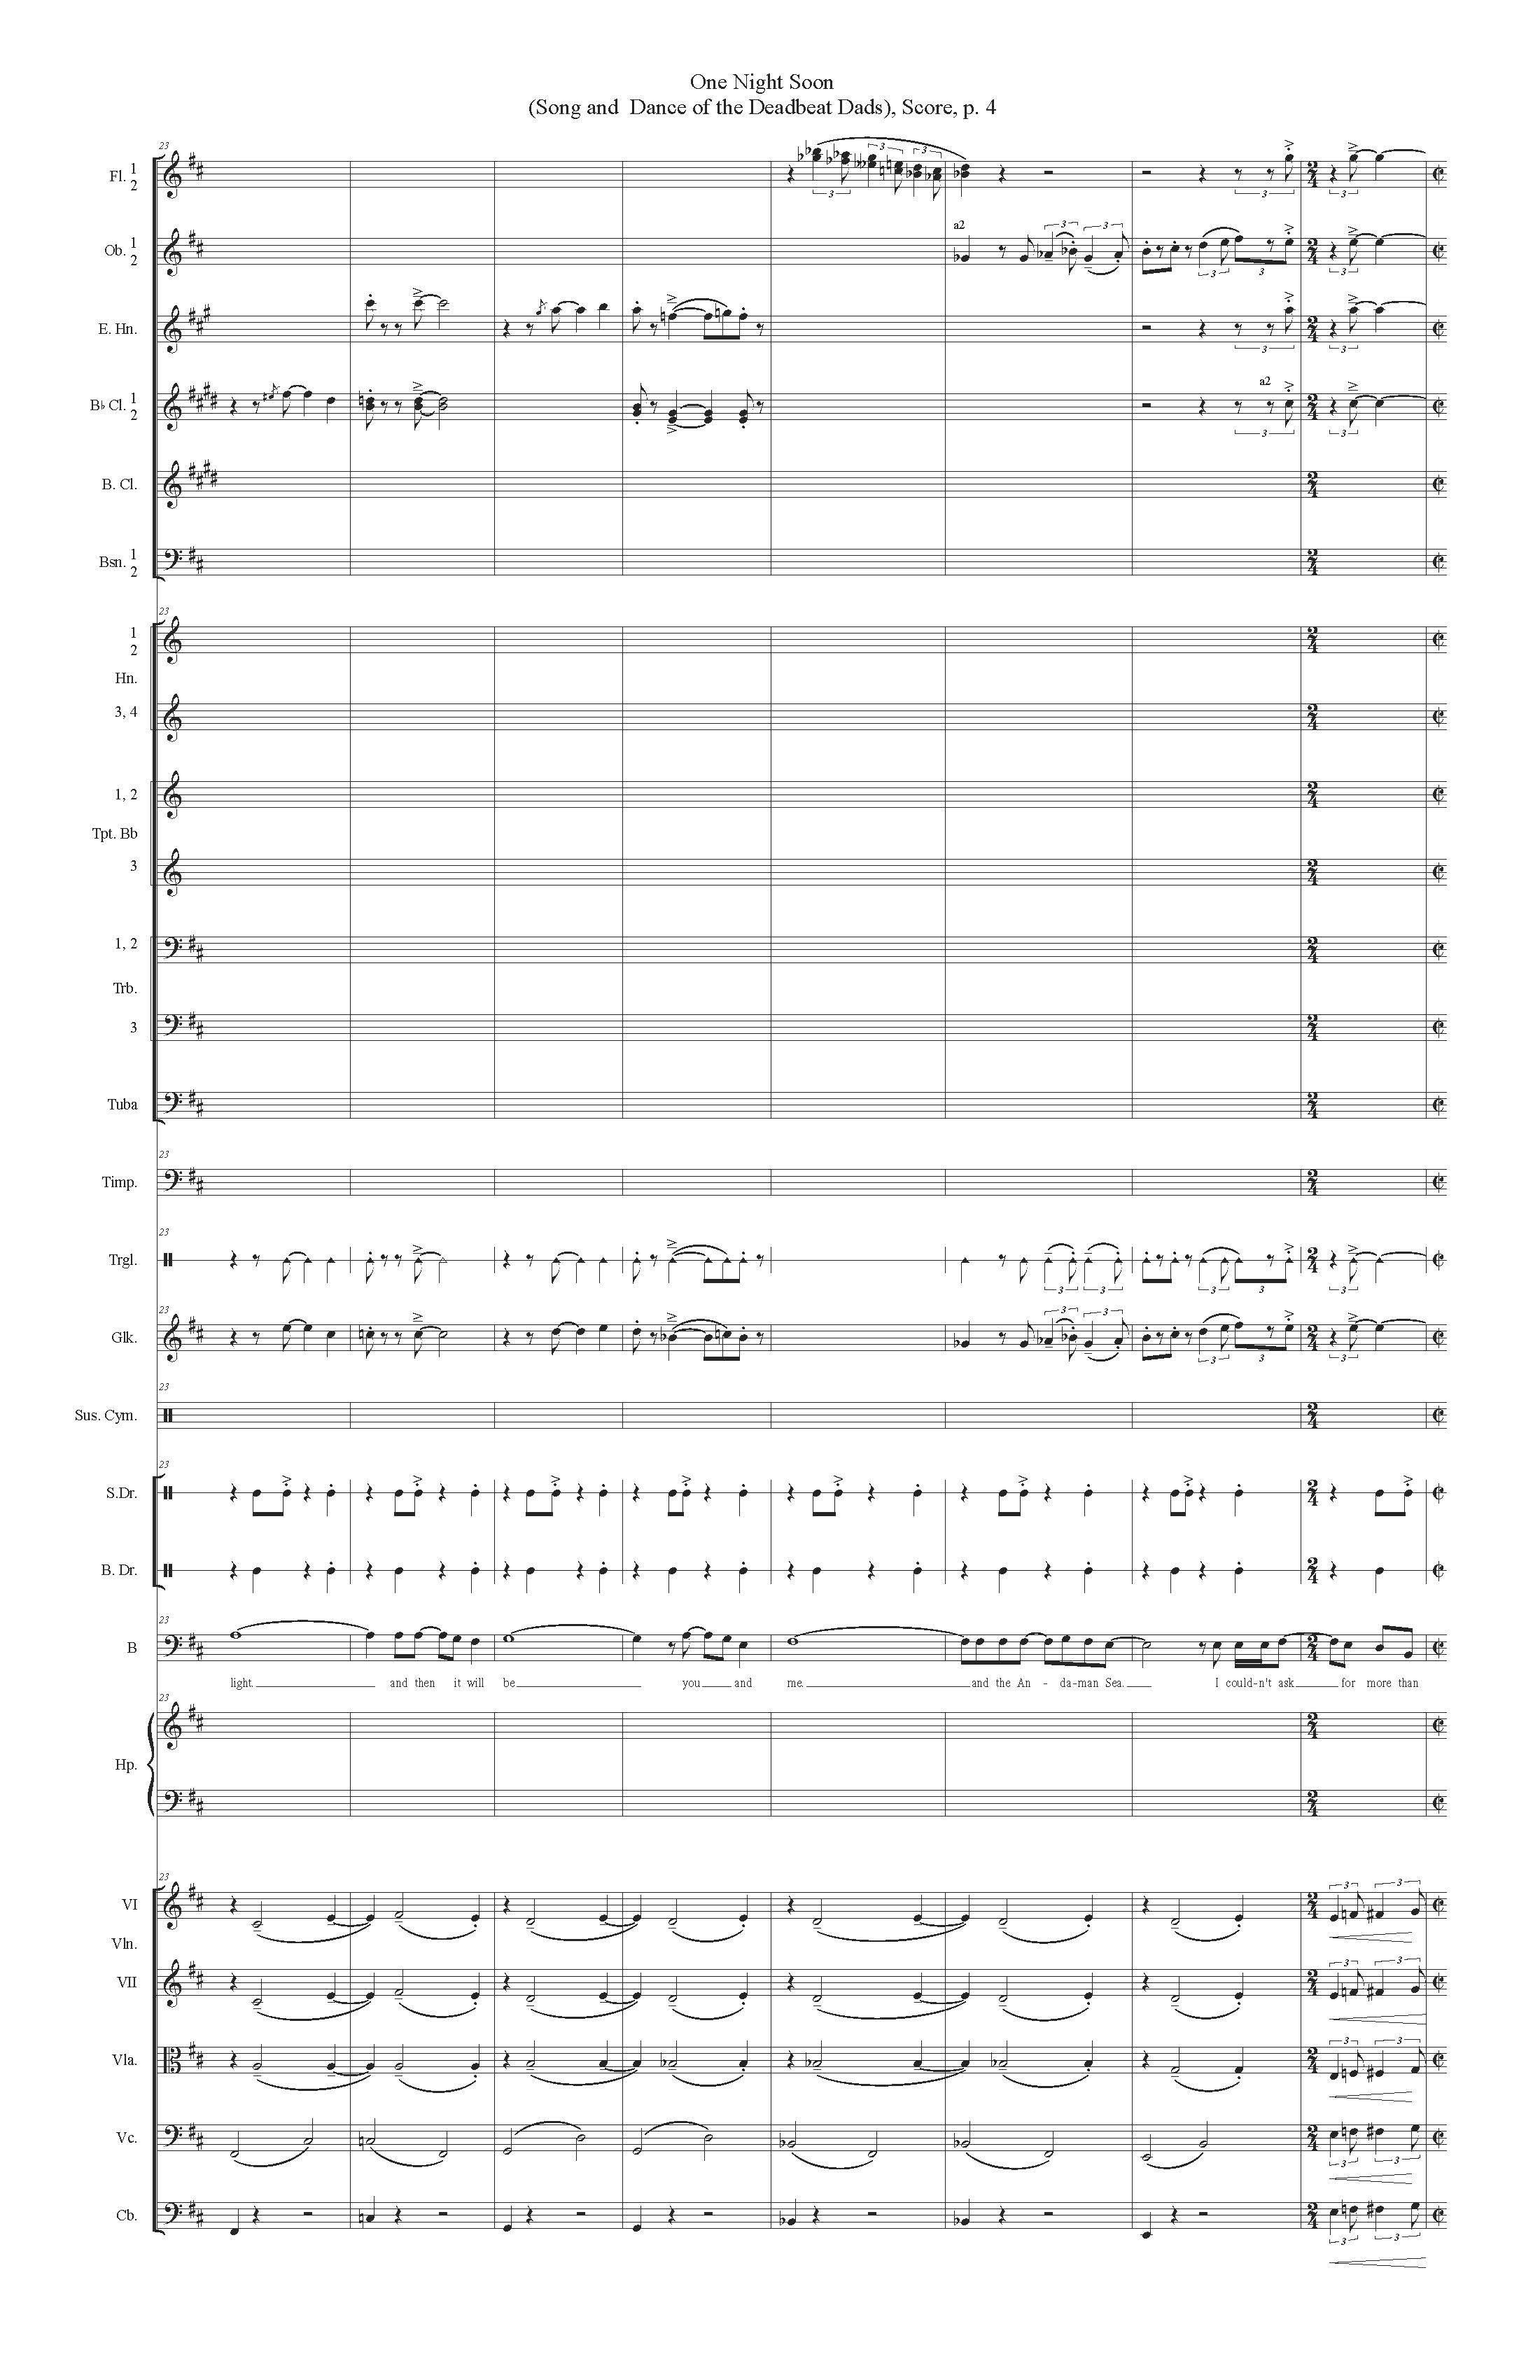 ONE NIGHT SOON ORCH - Score_Page_04.jpg